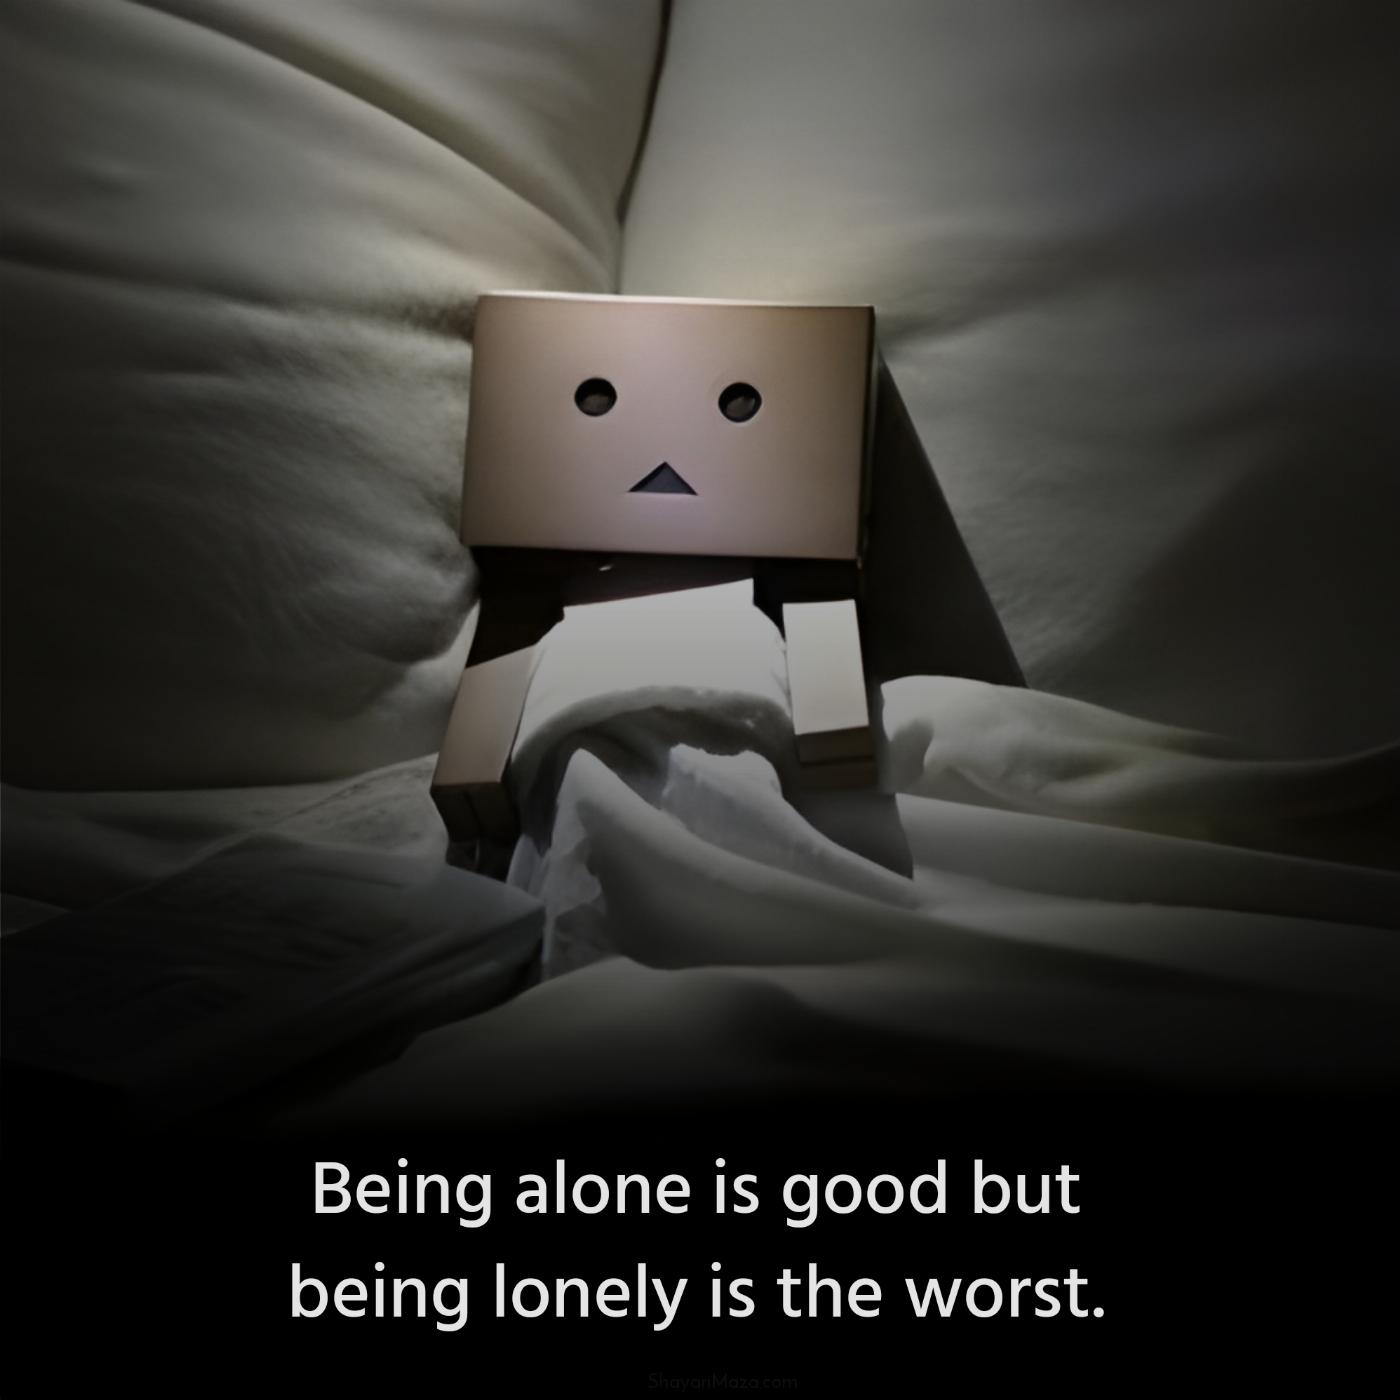 Being alone is good but being lonely is the worst